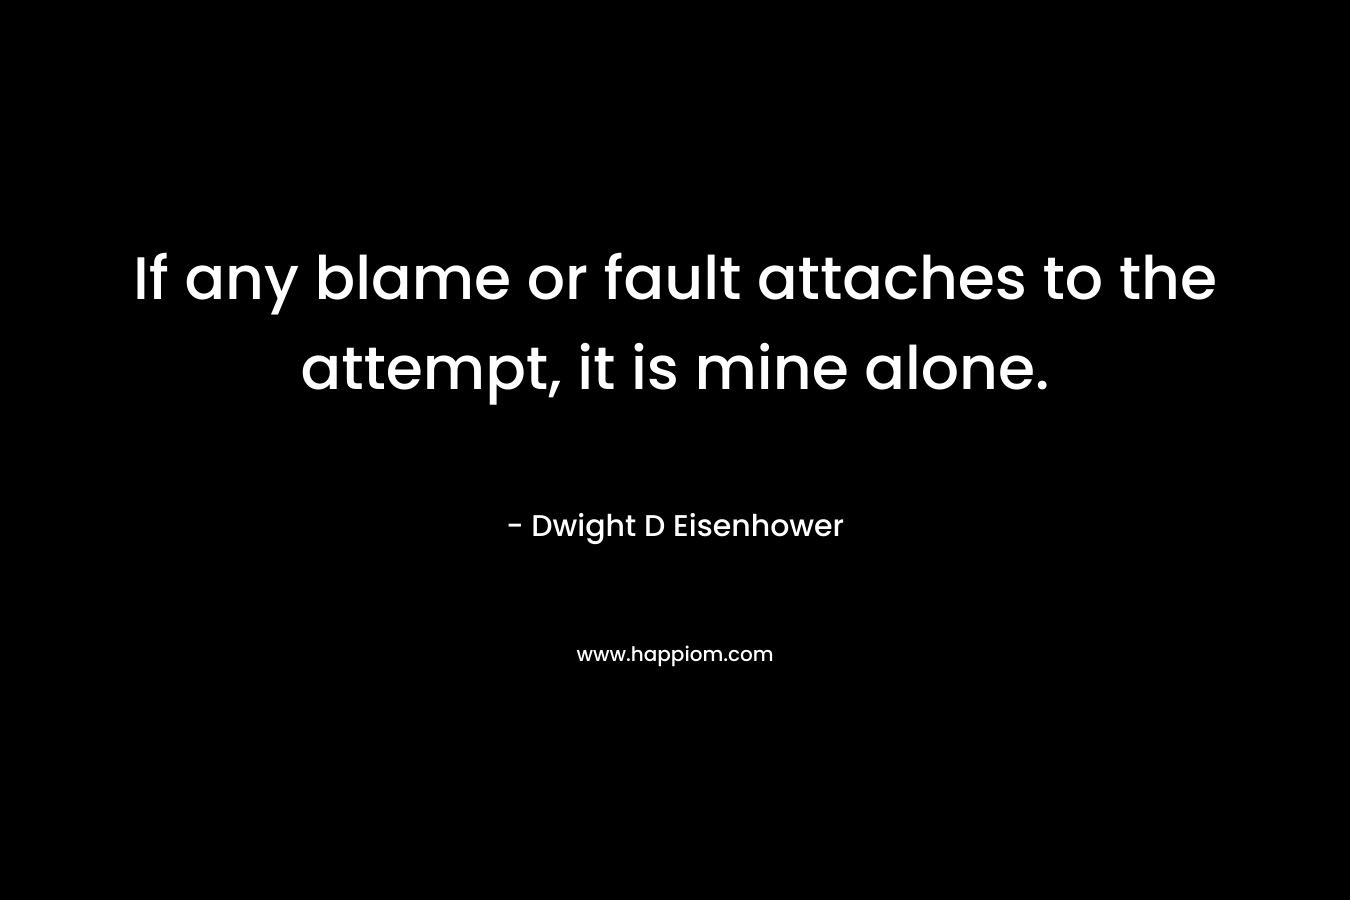 If any blame or fault attaches to the attempt, it is mine alone. – Dwight D Eisenhower